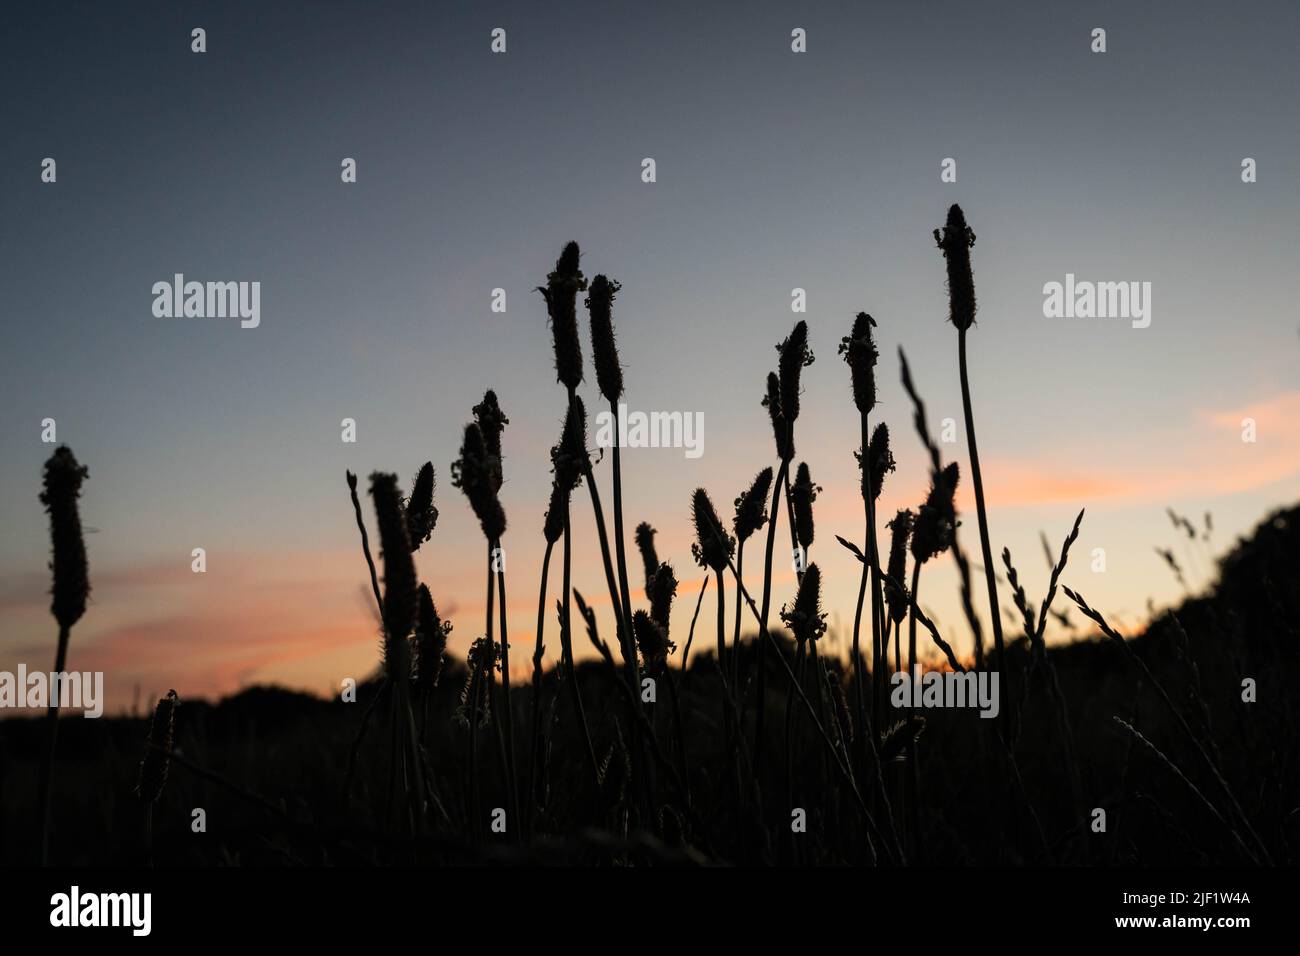 Meadow foxtails silhouetted at dusk Stock Photo